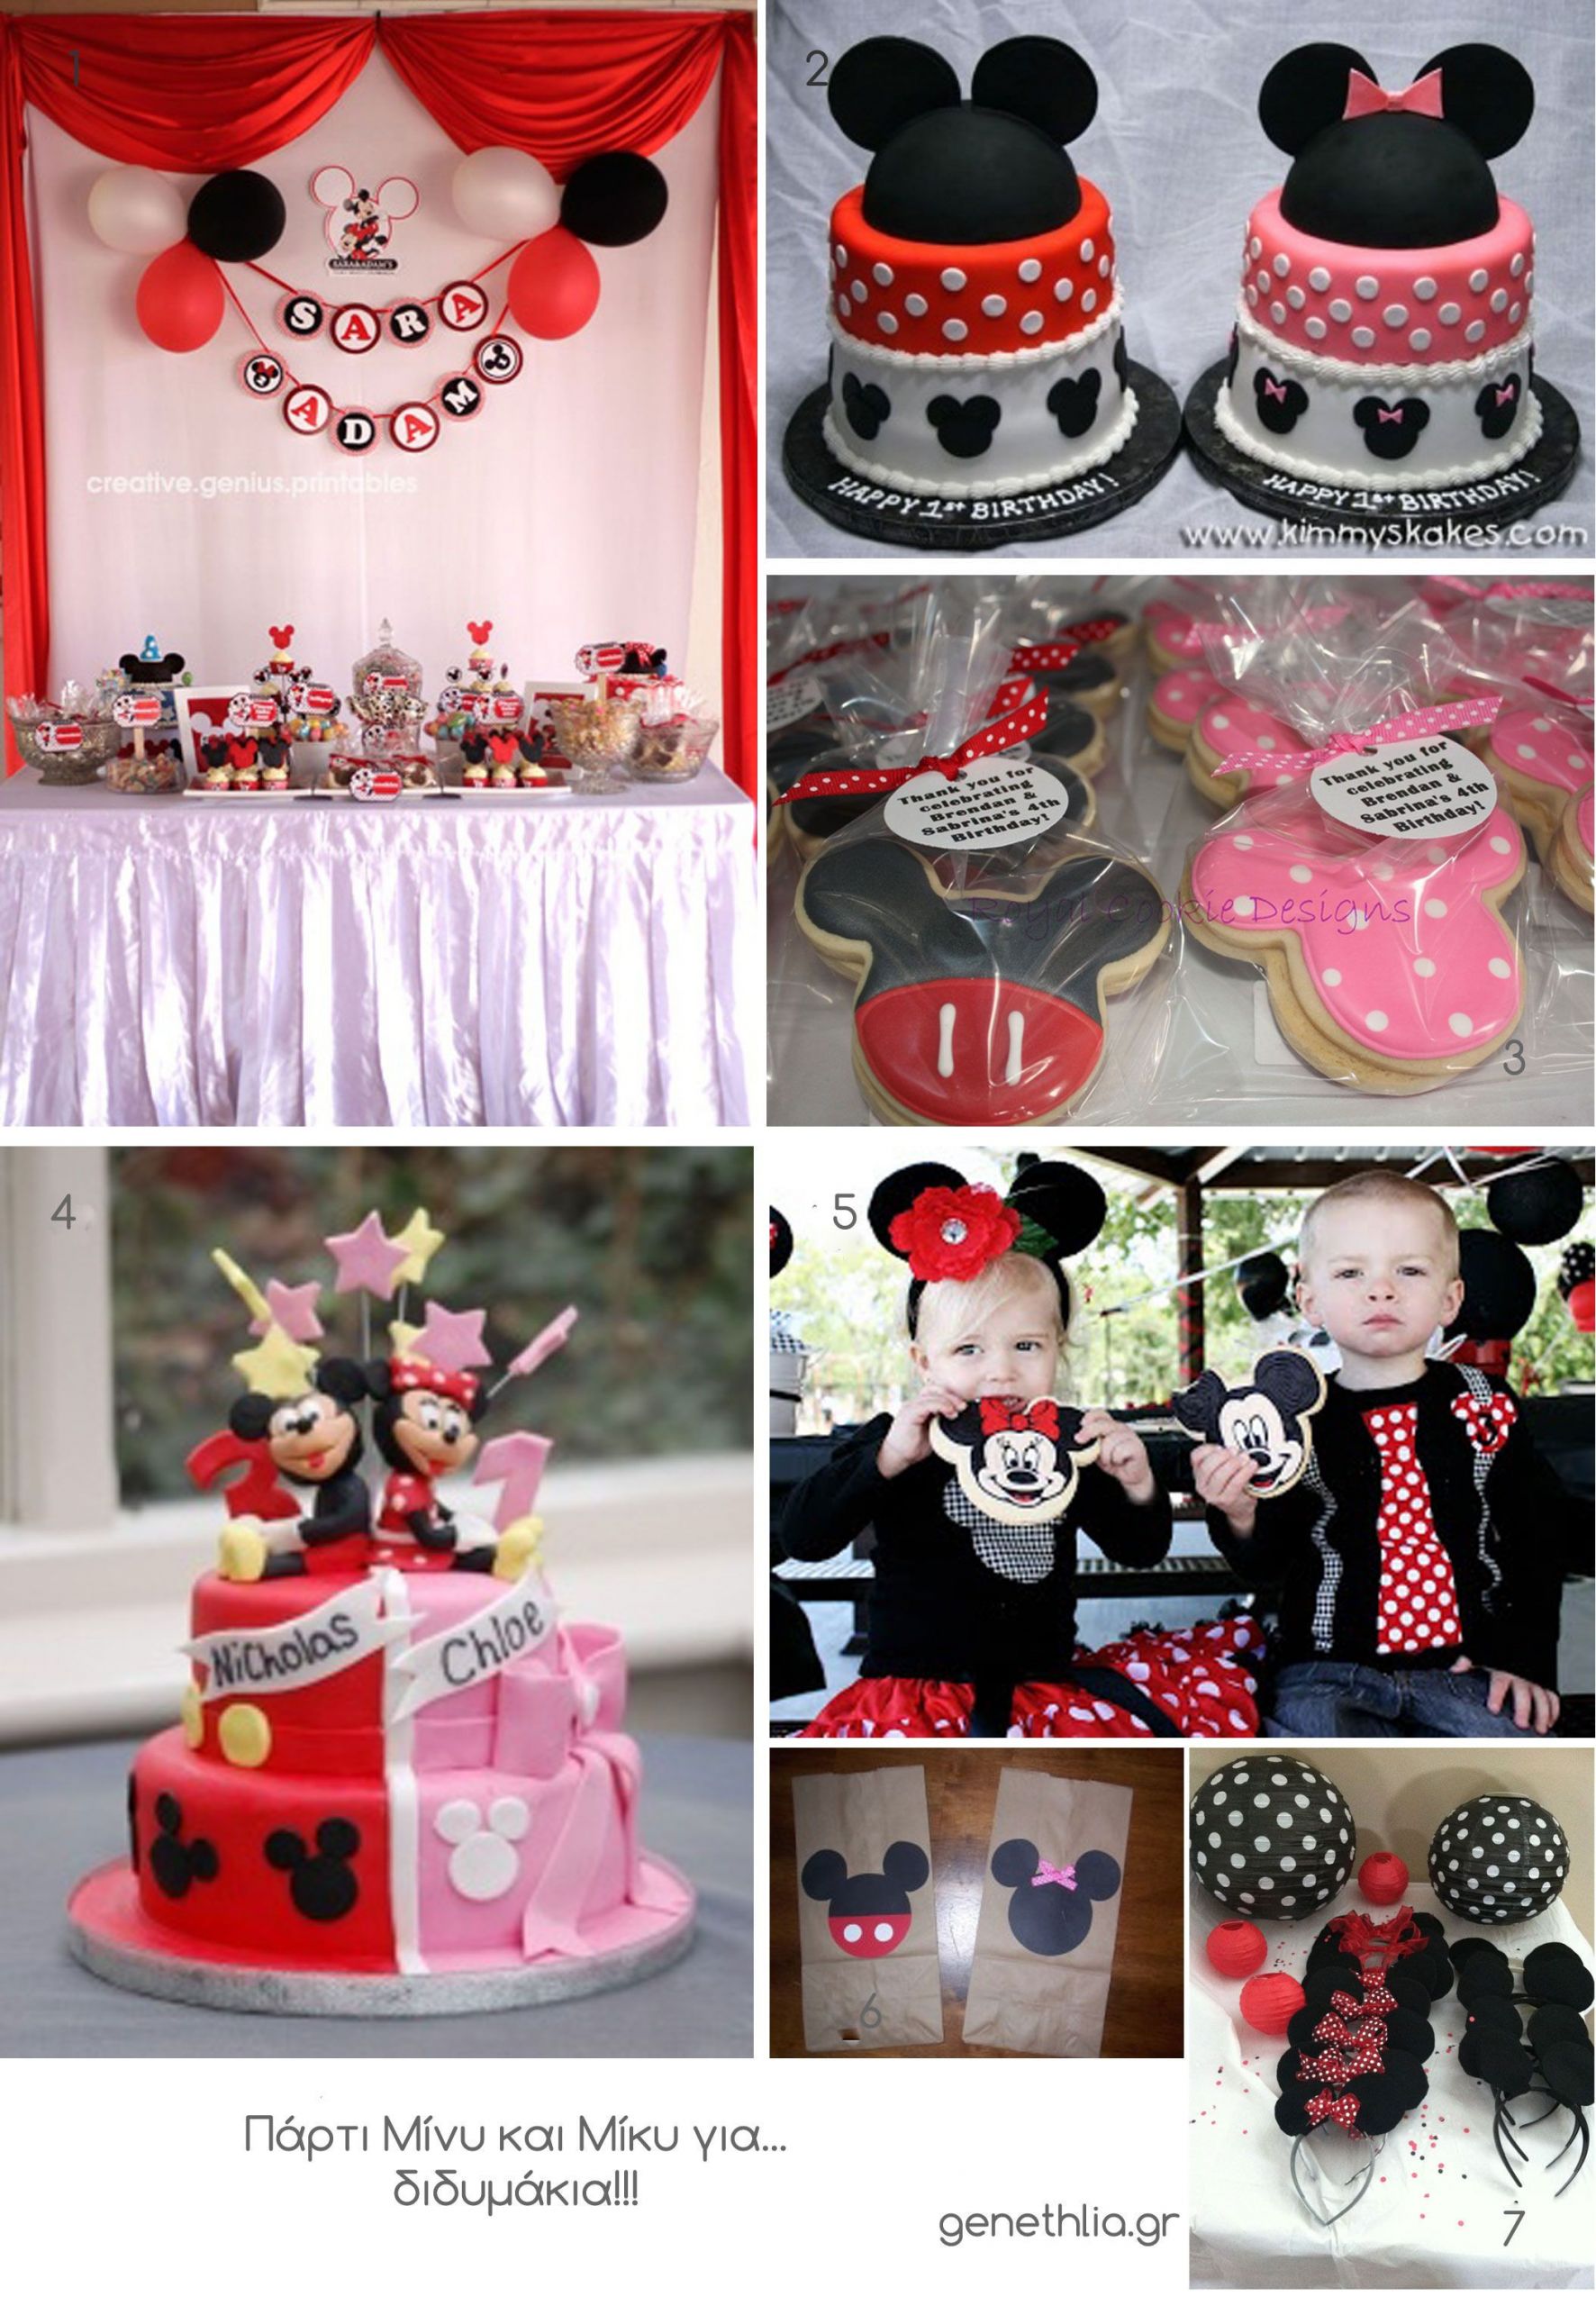 Boy Girl Birthday Party Ideas
 Παρτι Μινυ και Μικυ για διδυμα Minnie and Mickey party